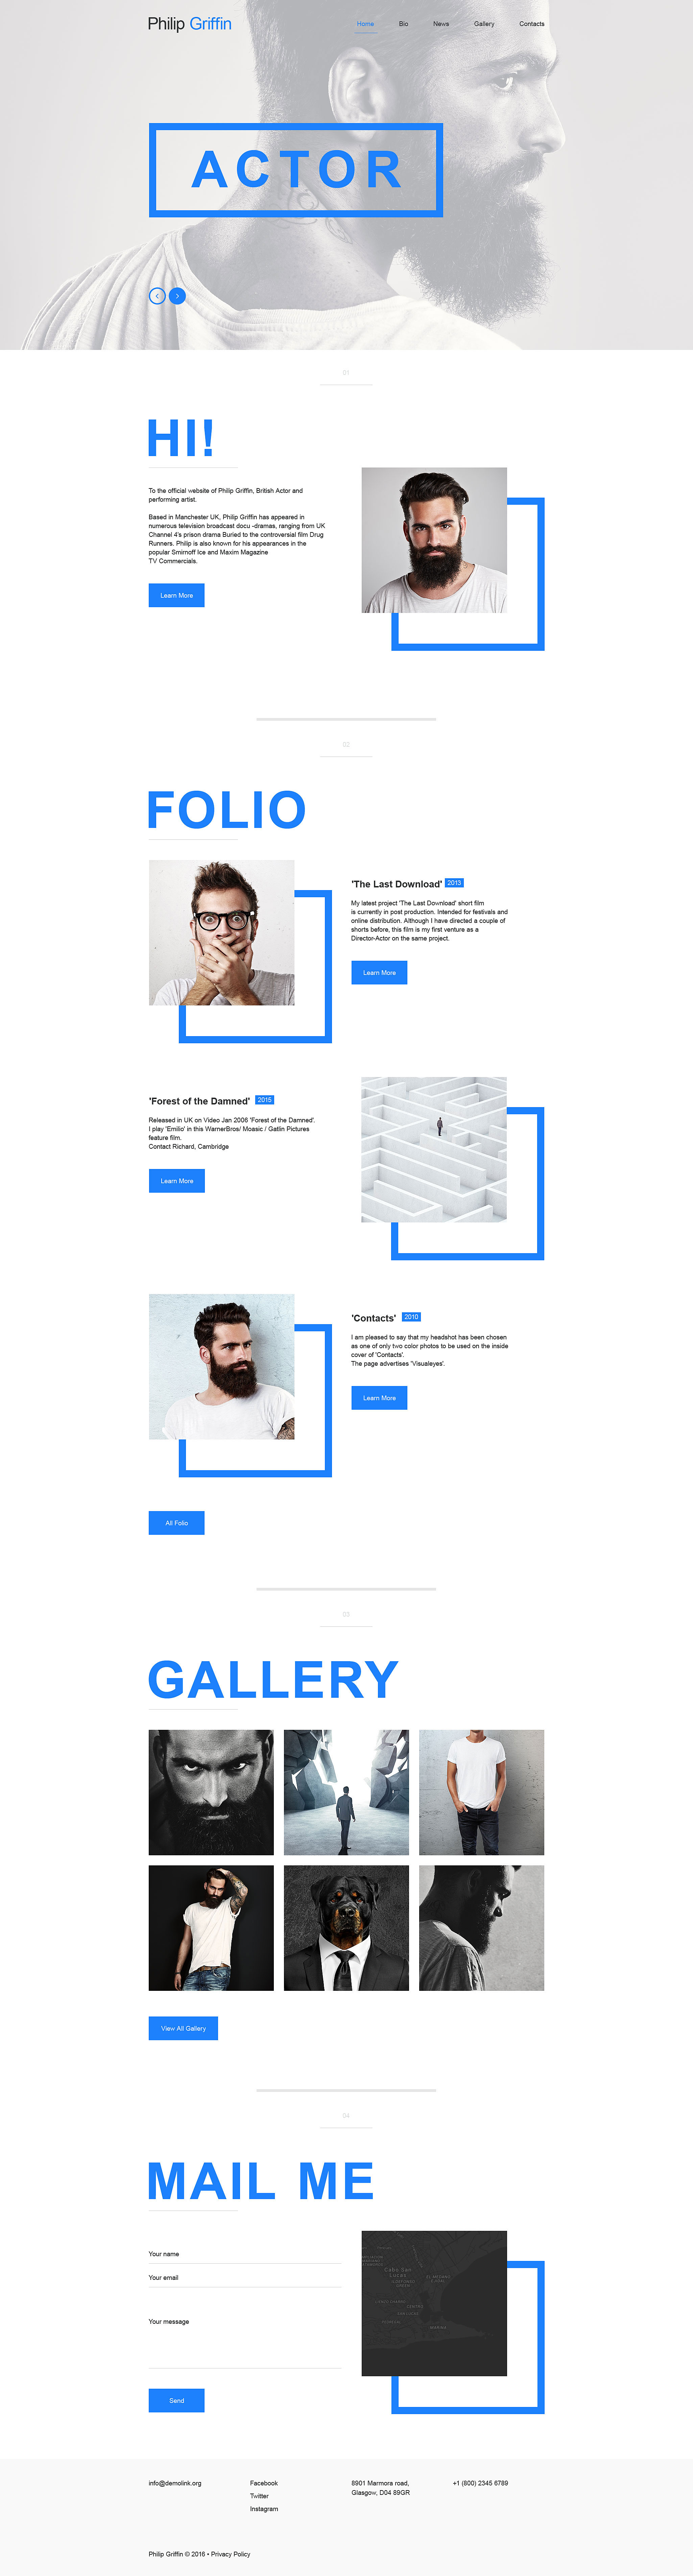 Muse Templates